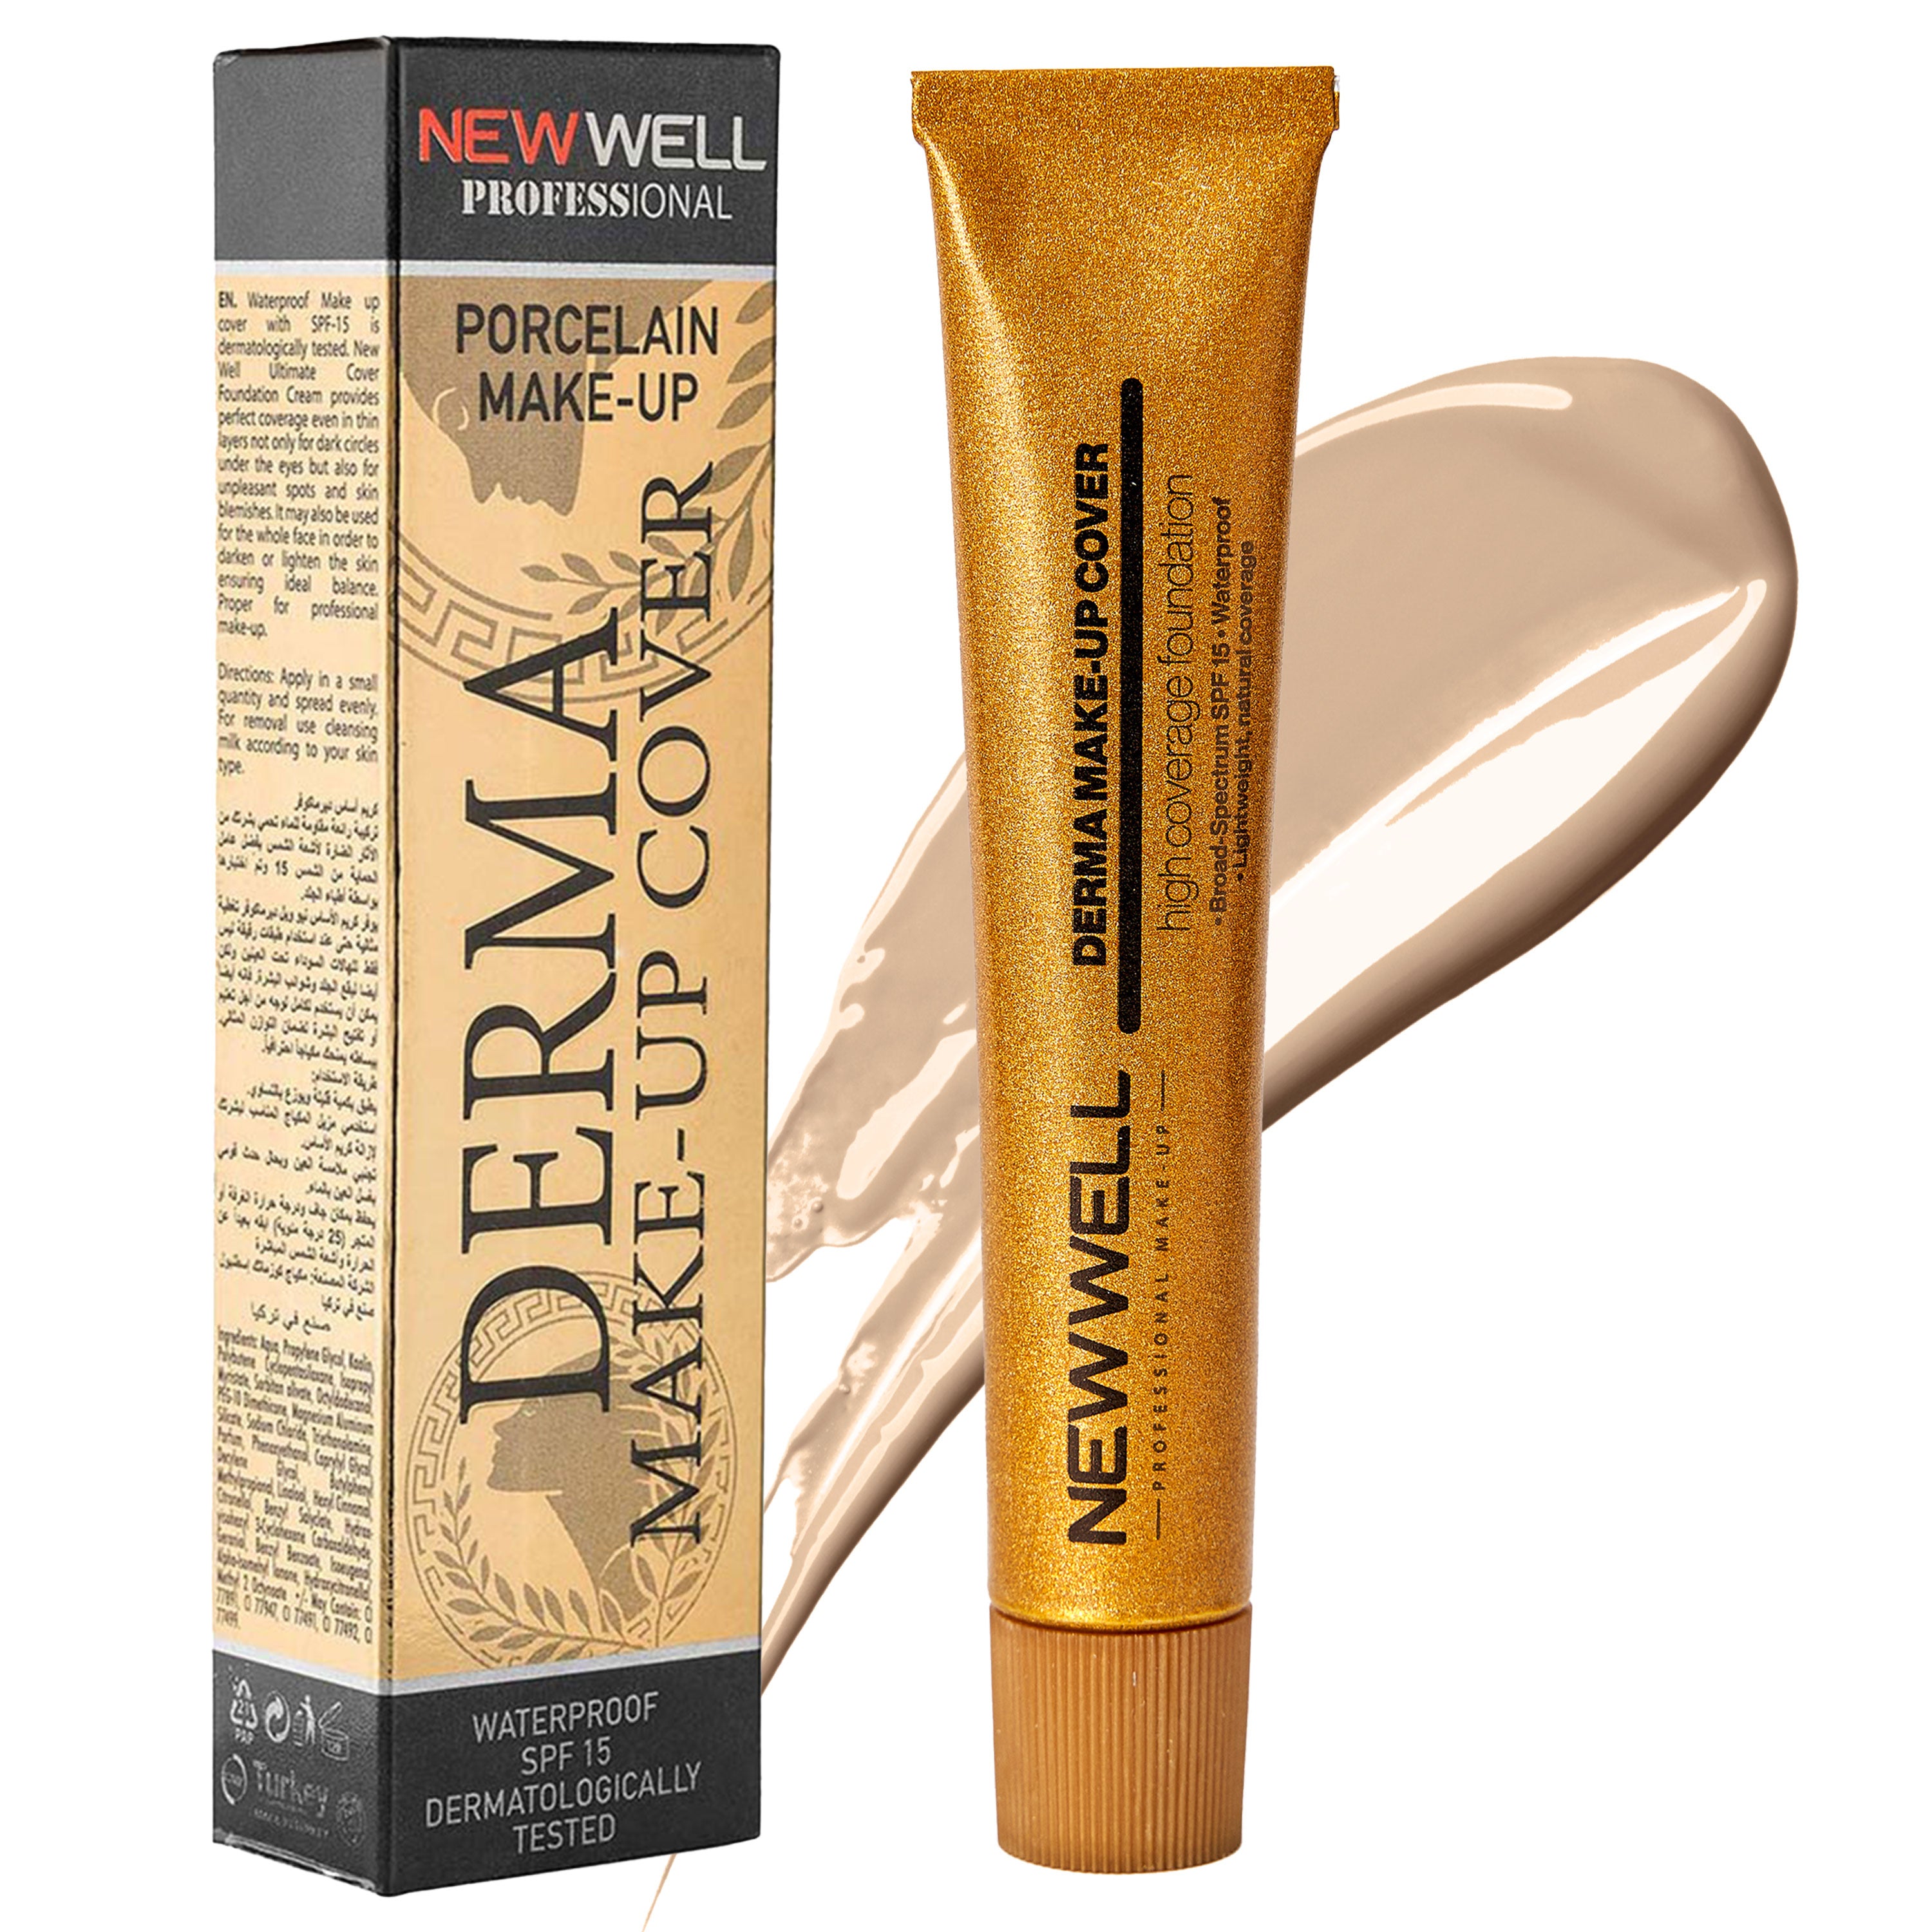 NEWWELL Derma Make-Up Full Cover – Foundation with porcelain effect